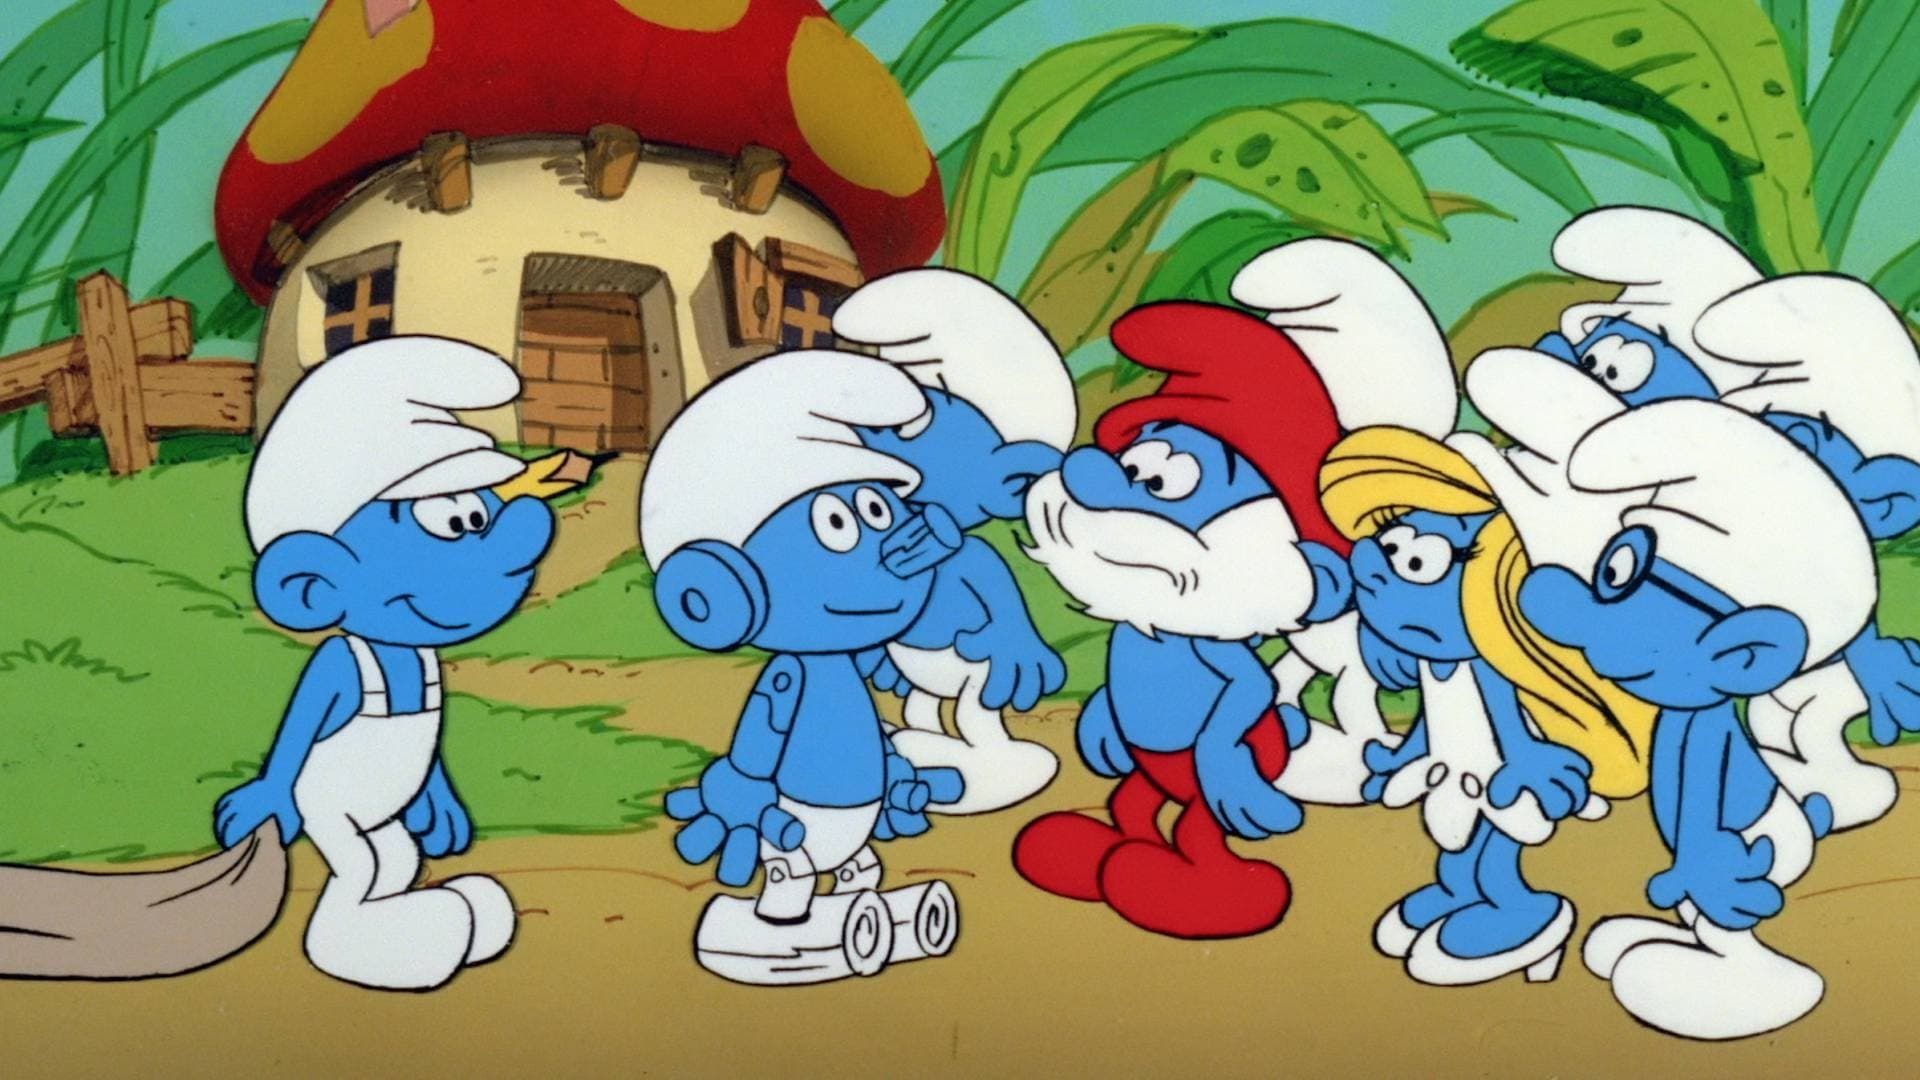 The Smurfs background